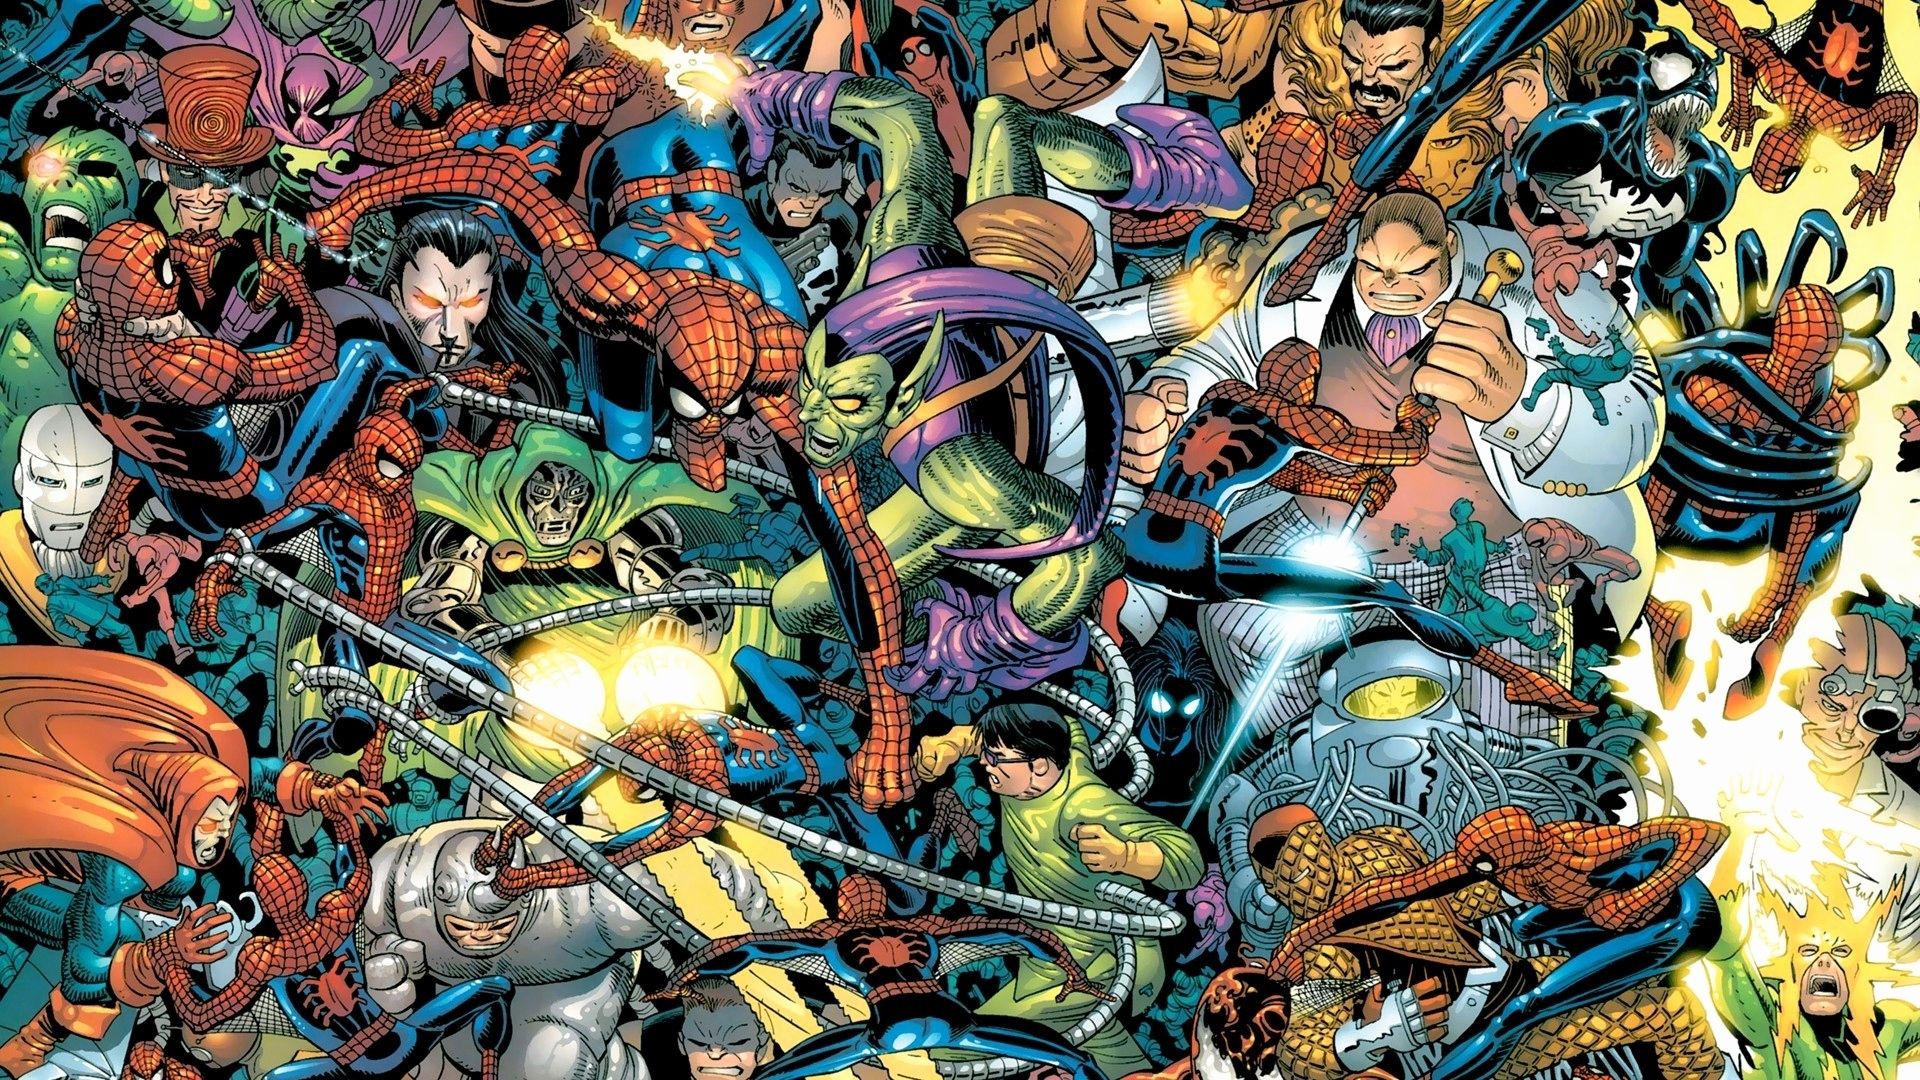 Comic Book Wallpaper New Pins for Marvel Ic Book Wallpaper From Desktop Background Ideas of The Hudson